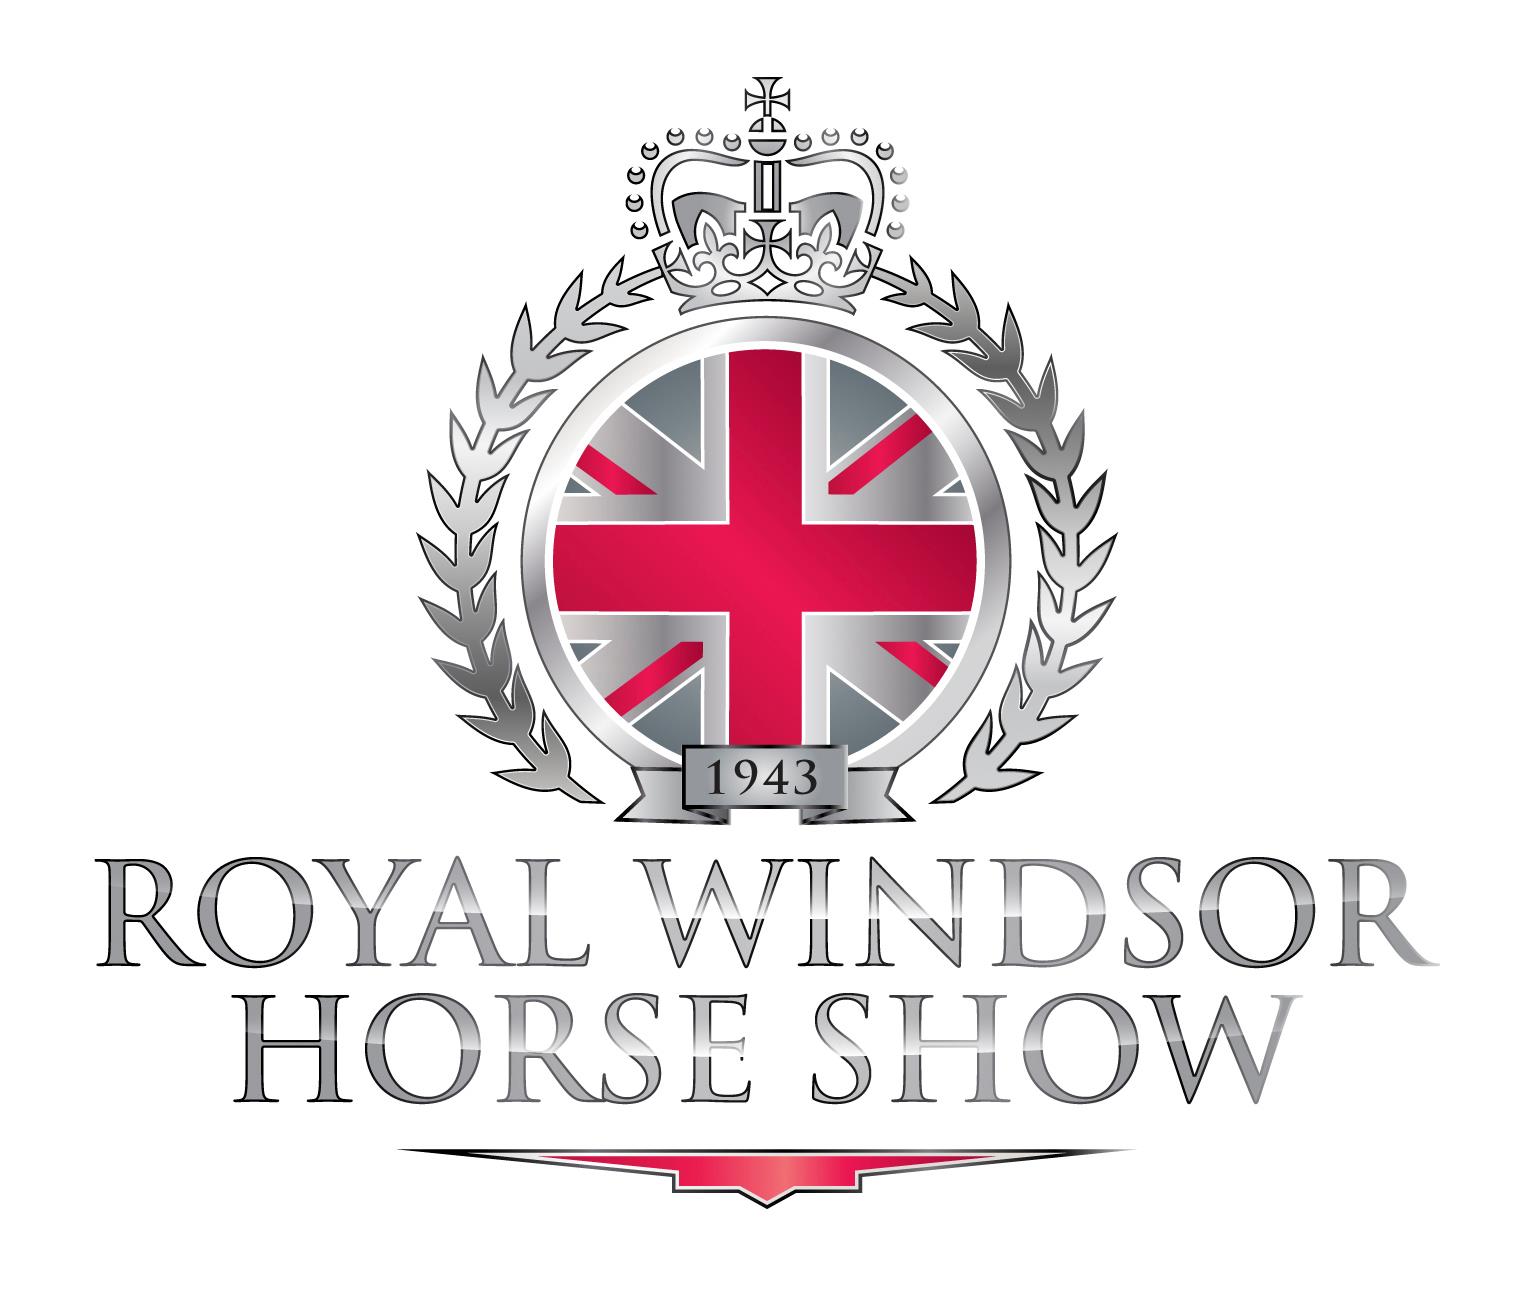 How to watch Royal Windsor Horse Show